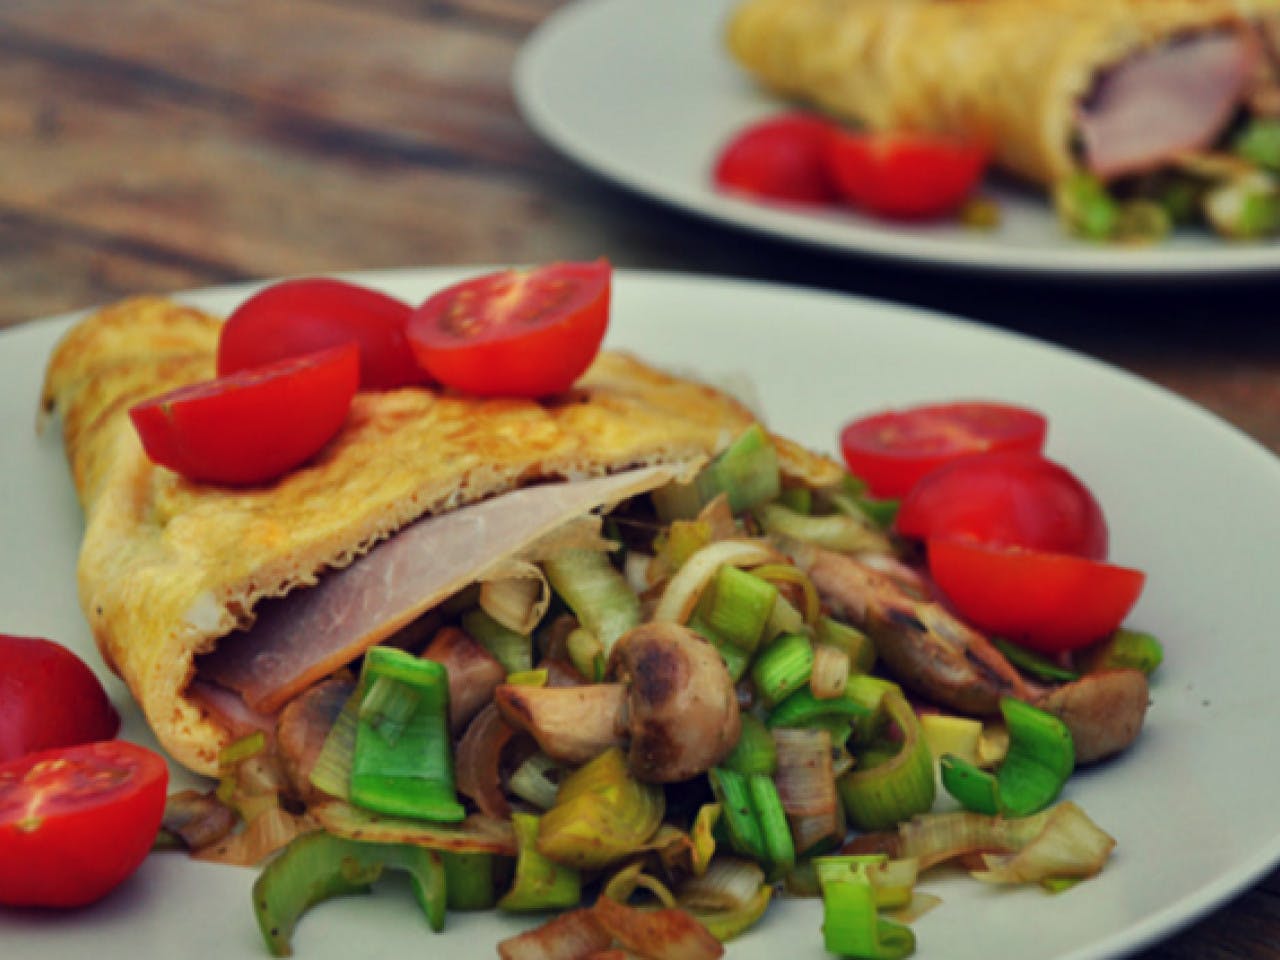 Stuffed omelette with leek and mushrooms